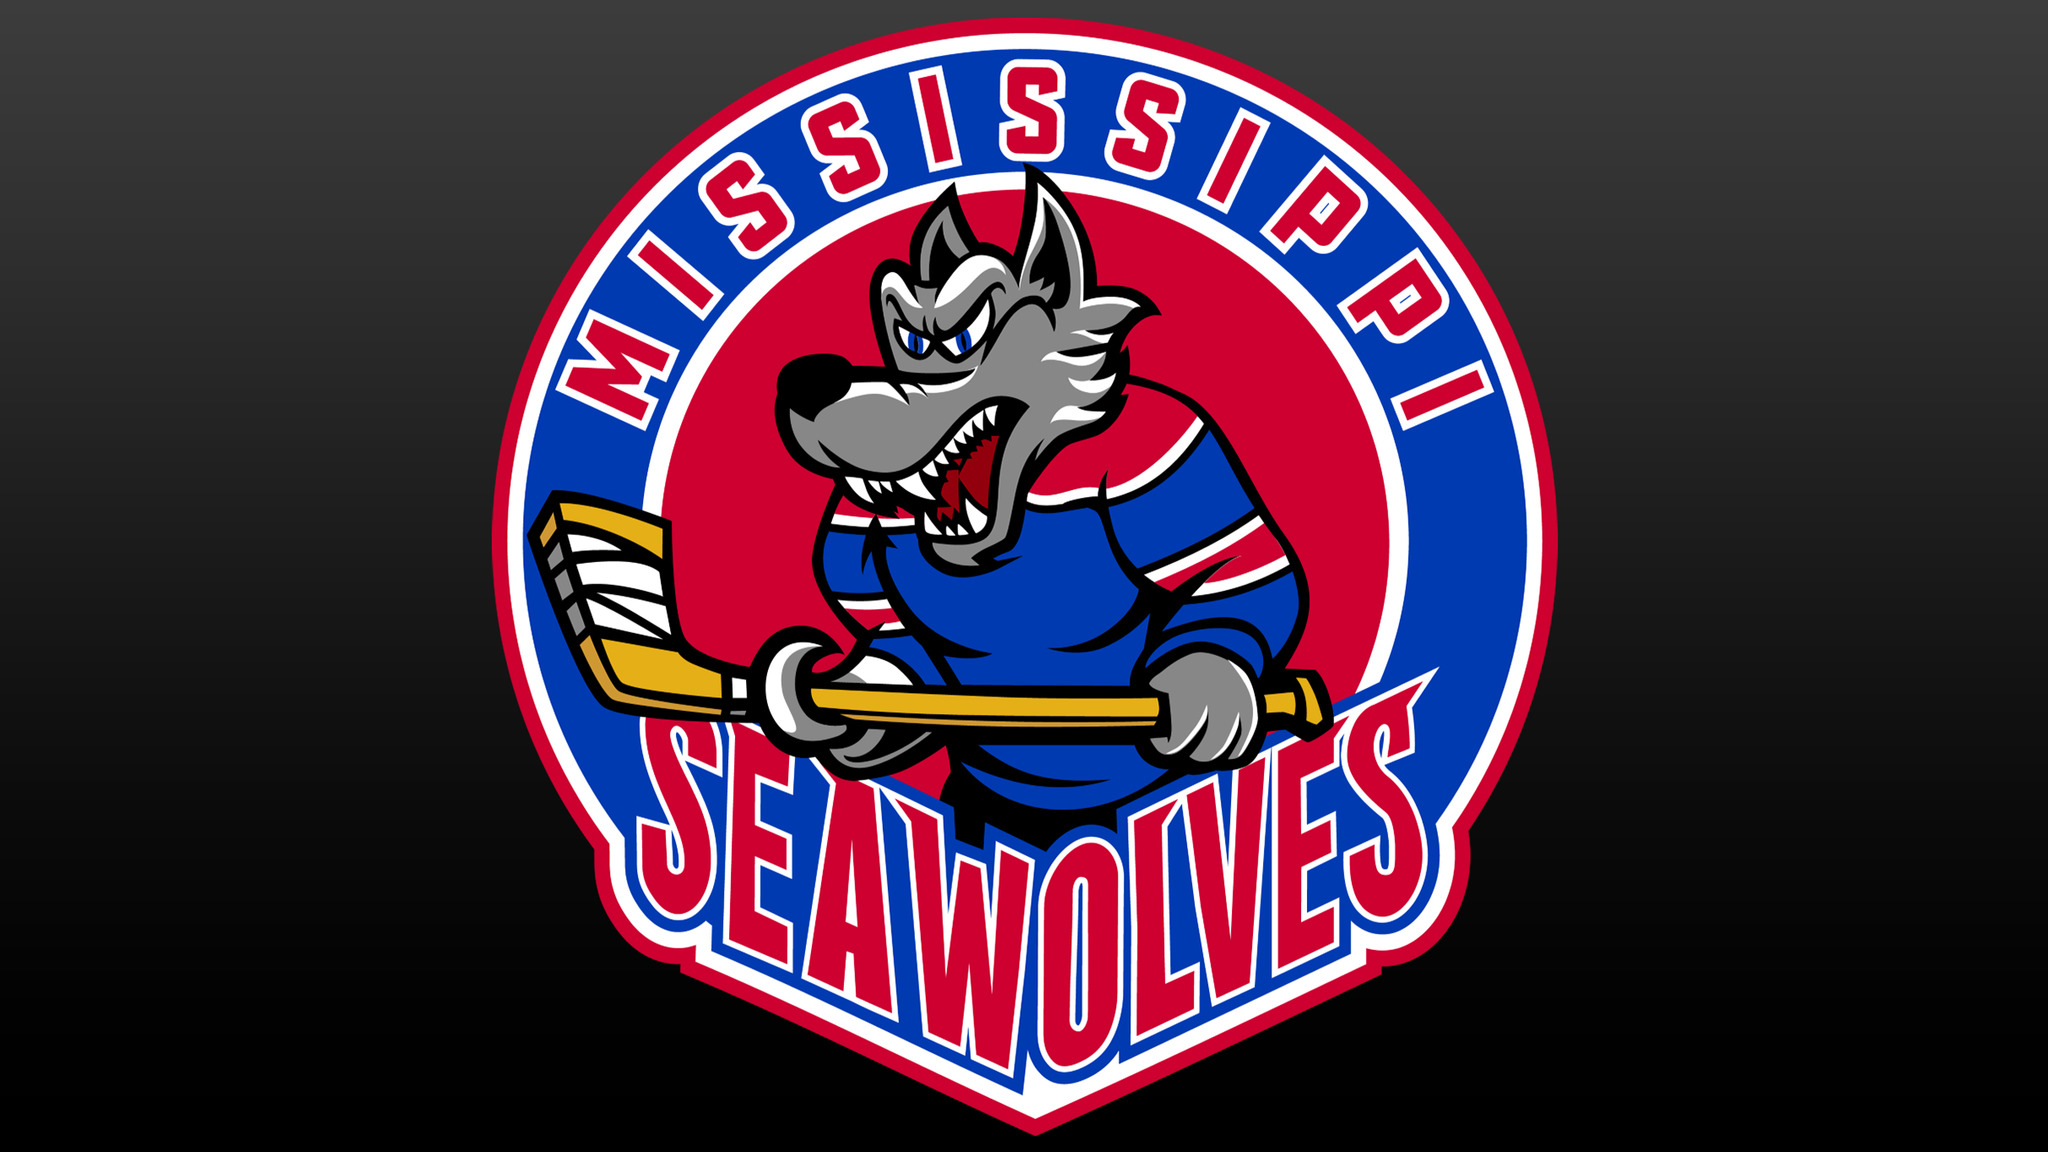 Mississippi Sea Wolves Tickets Single Game Tickets & Schedule